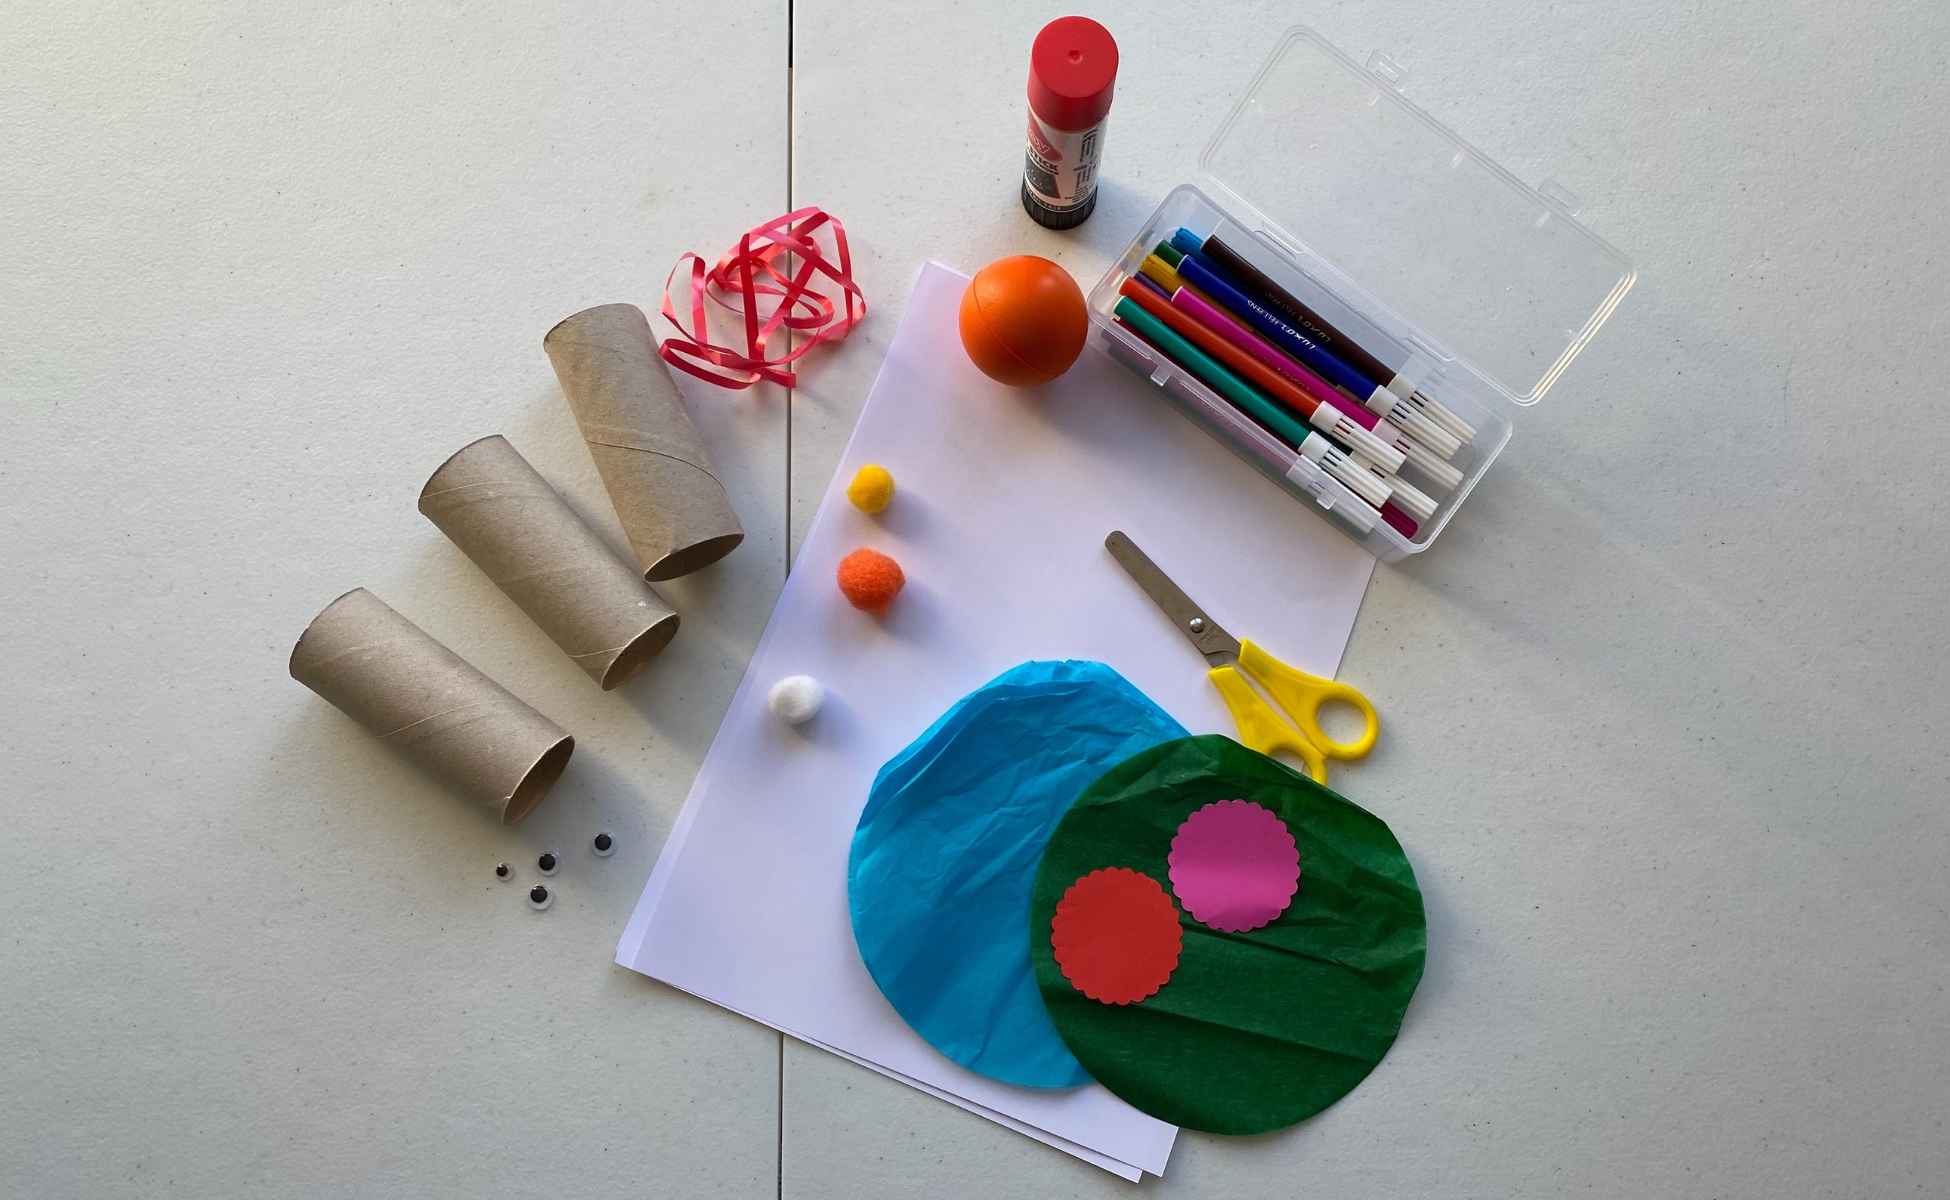 Materials need for Snowman Strike Christmas activity. Toilet roll tubes, white paper, coloured pens, felts, pompoms, string, a ball, scissors and glue